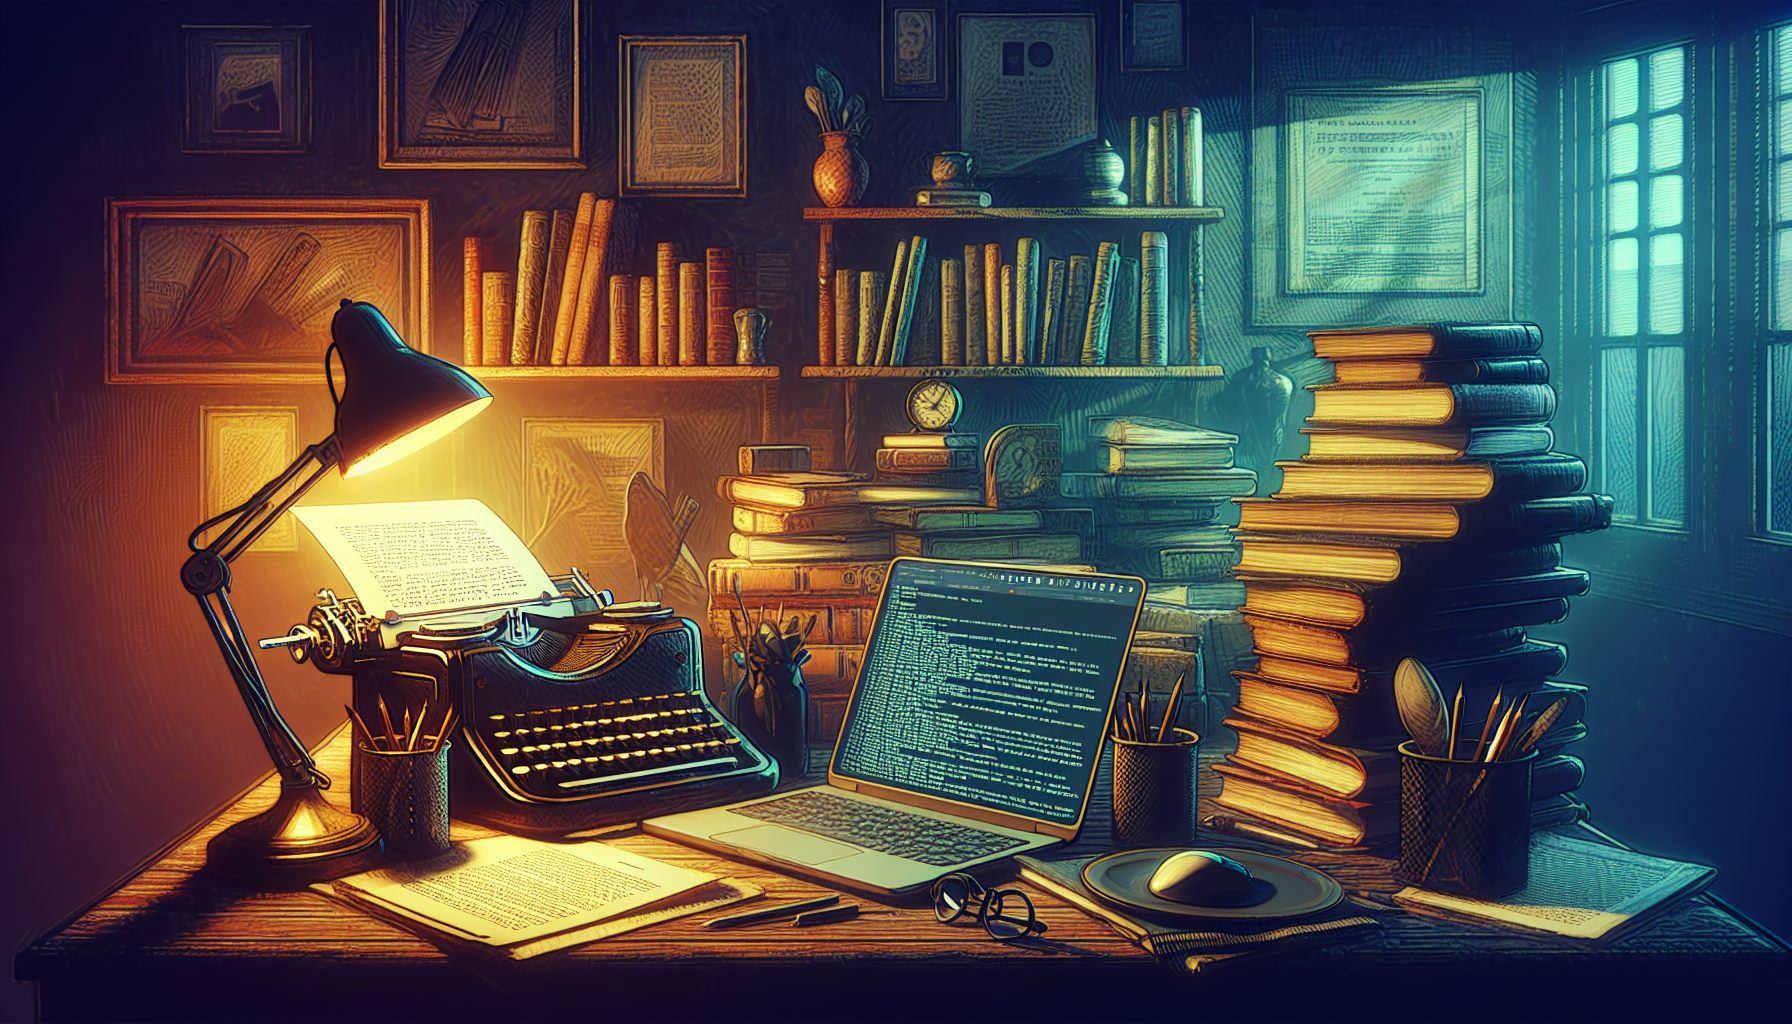 A vintage typewriter and a modern laptop open with screenwriting software, surrounded by classic and contemporary film scripts, glowing under a soft desk lamp in a cozy, book-lined study room, hinting at the bridging of traditional and digital methods in the pursuit of screenwriting.